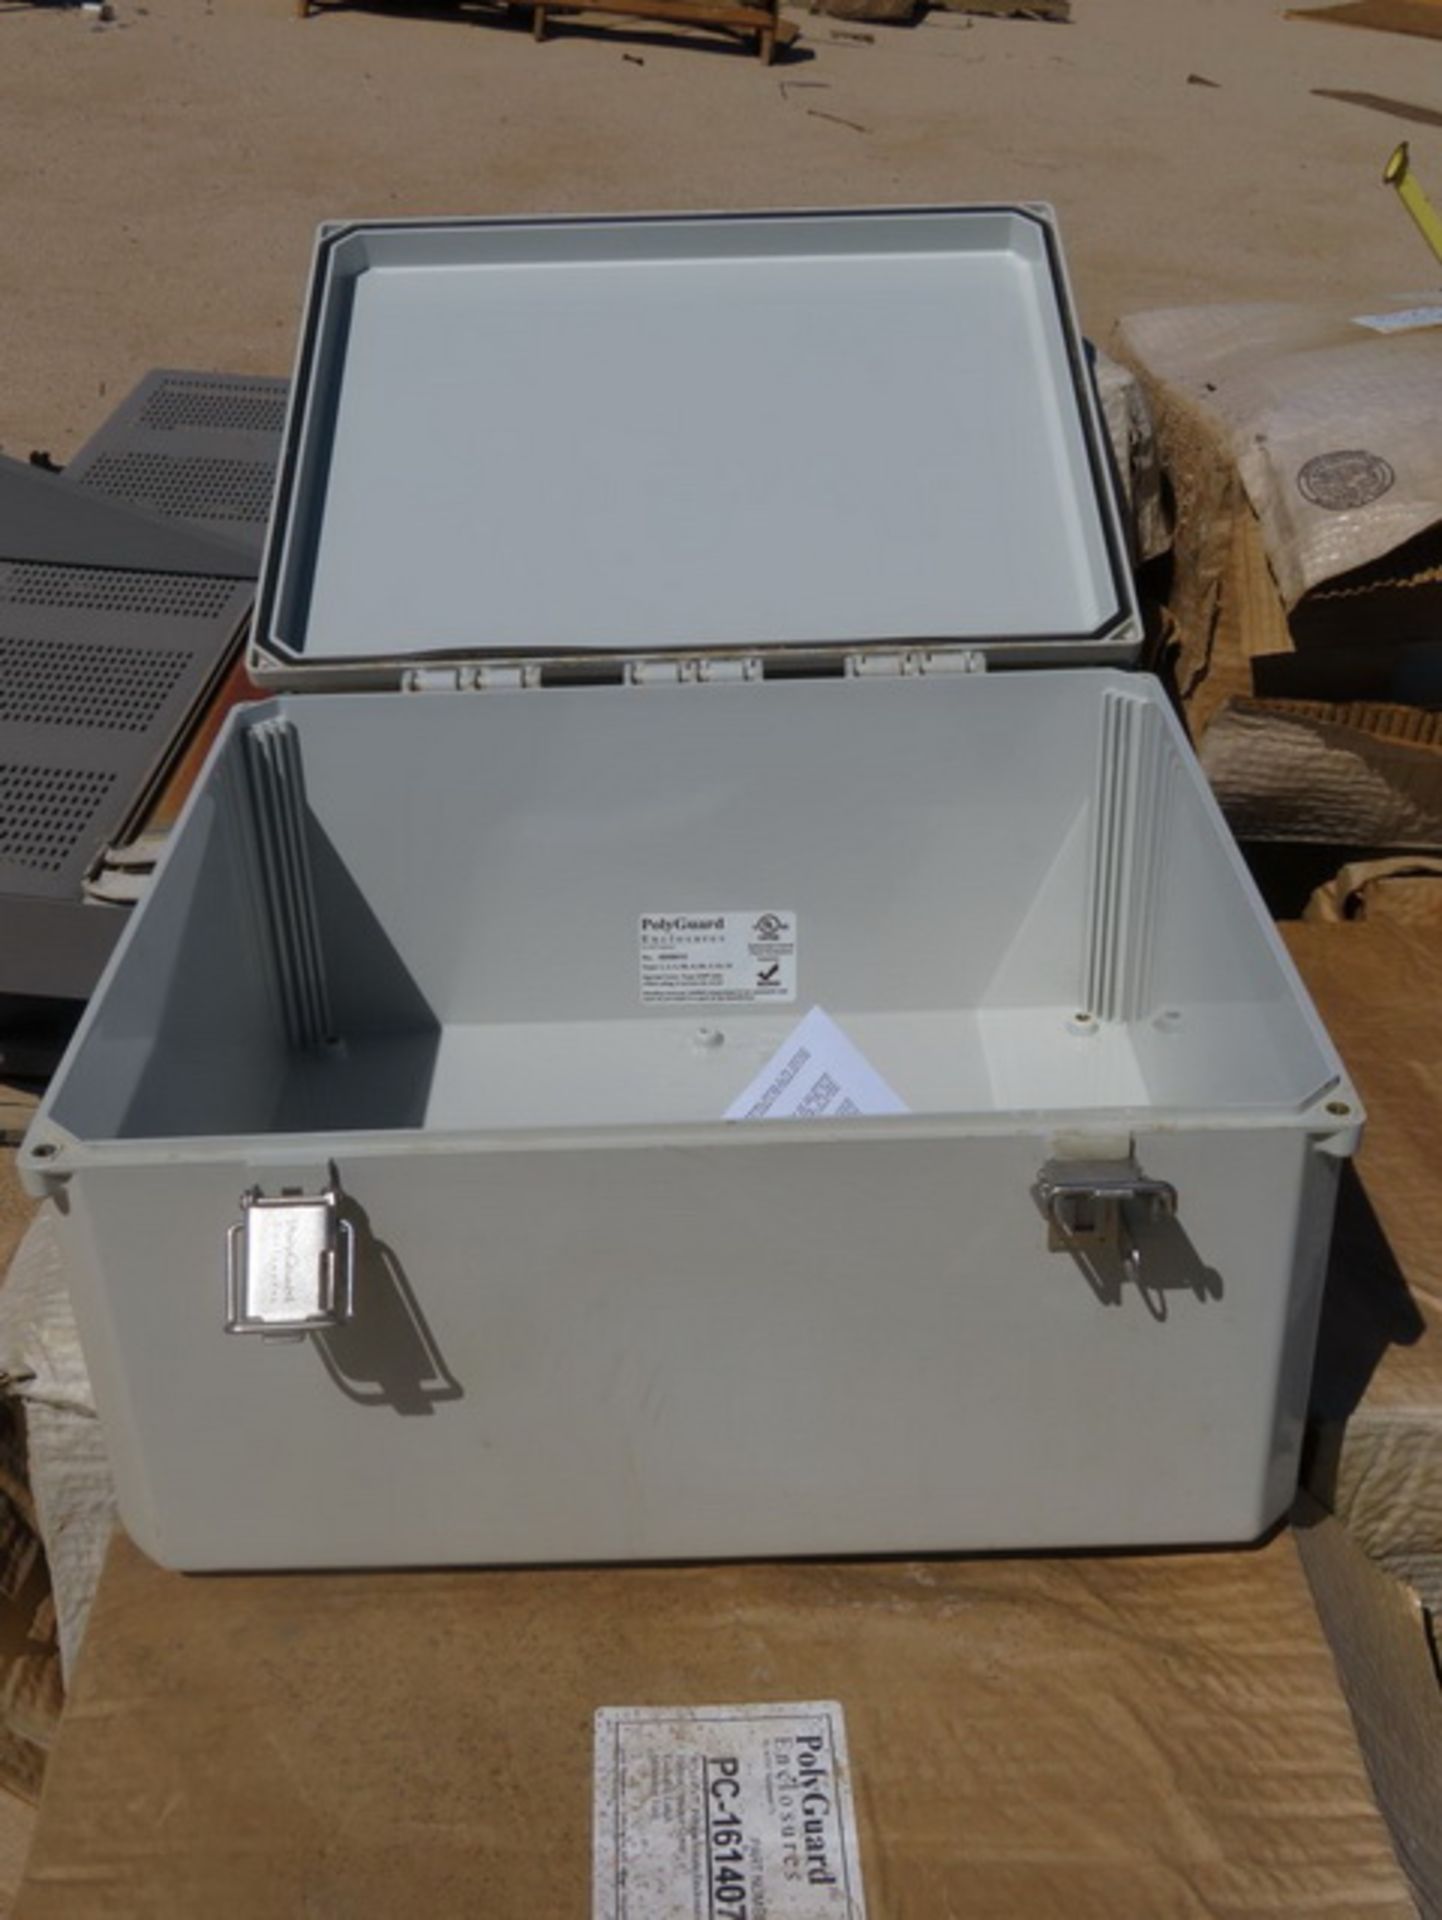 ACDC Equipment Co. PC-161407-HOLF Lot: Approx. (120) 16" x 14" x 7" Polycarbonate Enclosures. - Image 2 of 9